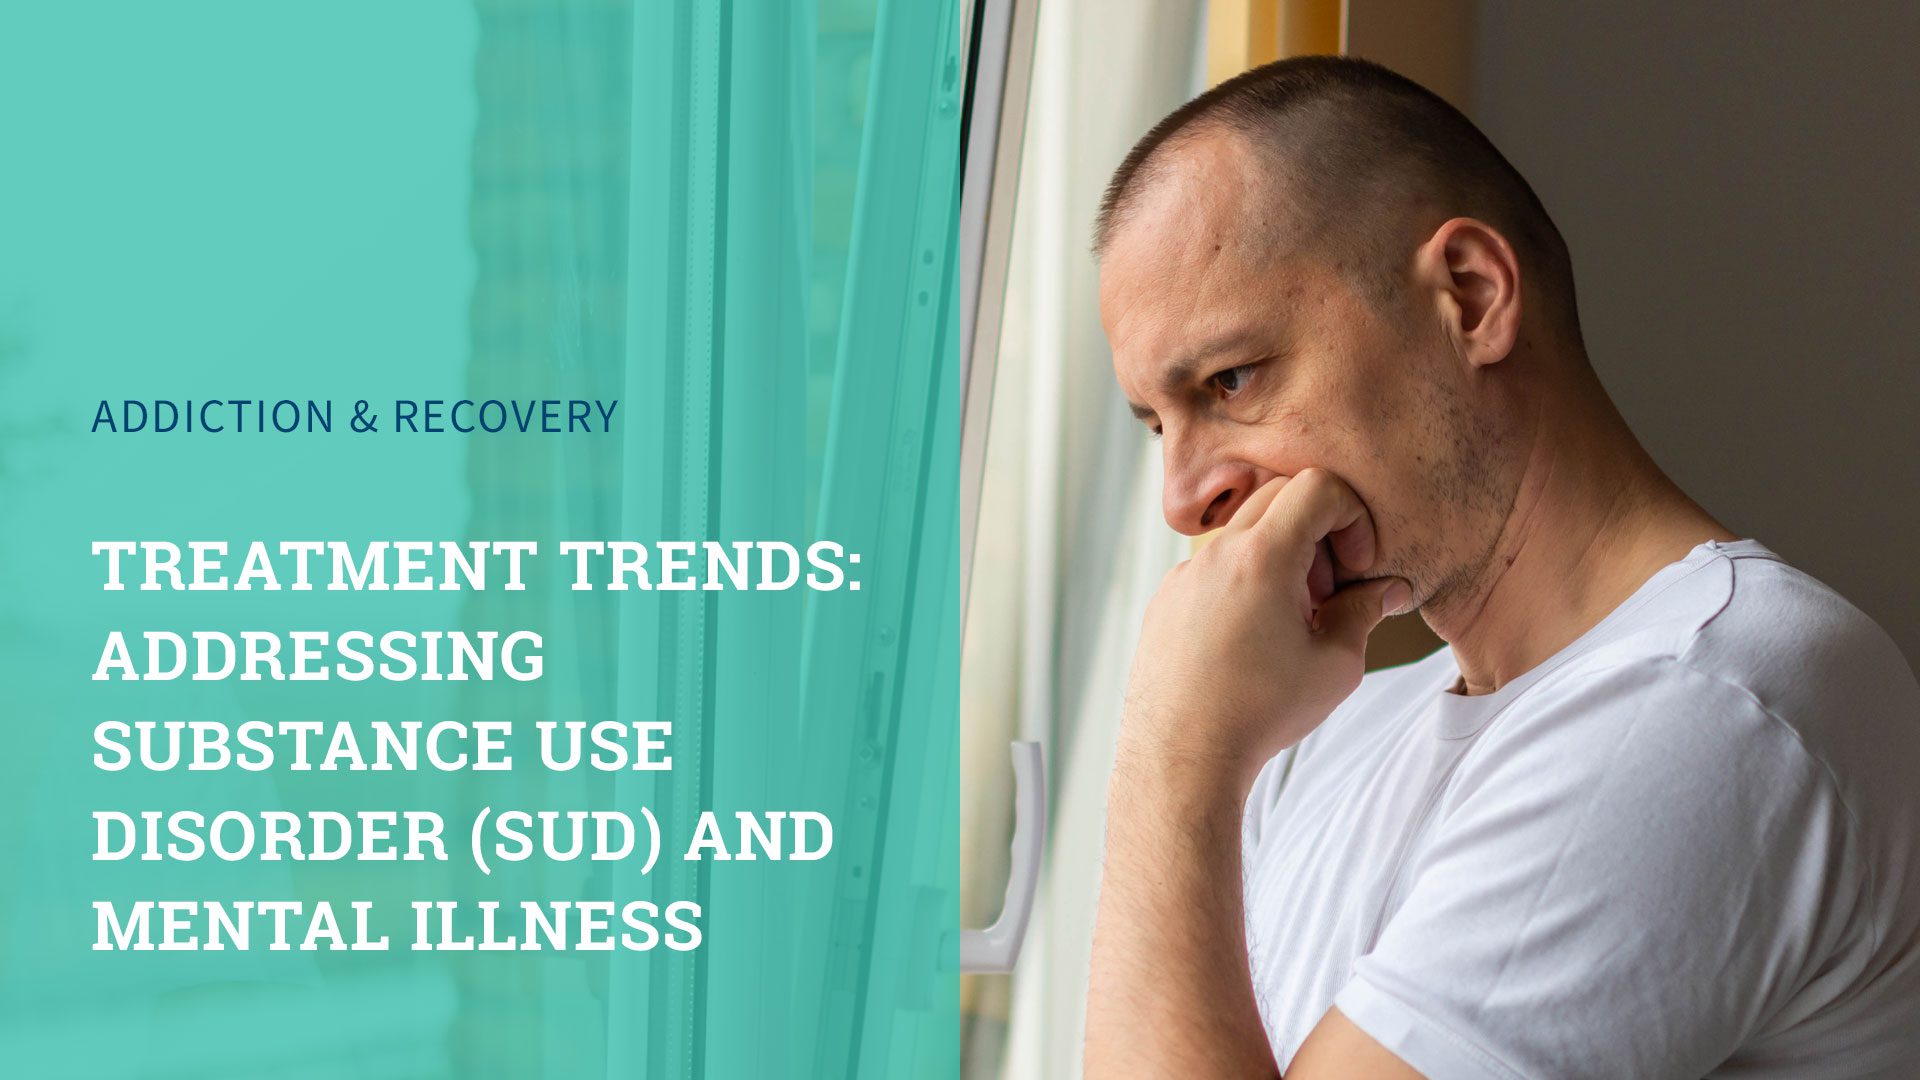 Treatment Trends: Addressing Substance Use Disorder (SUD) and Mental Illness